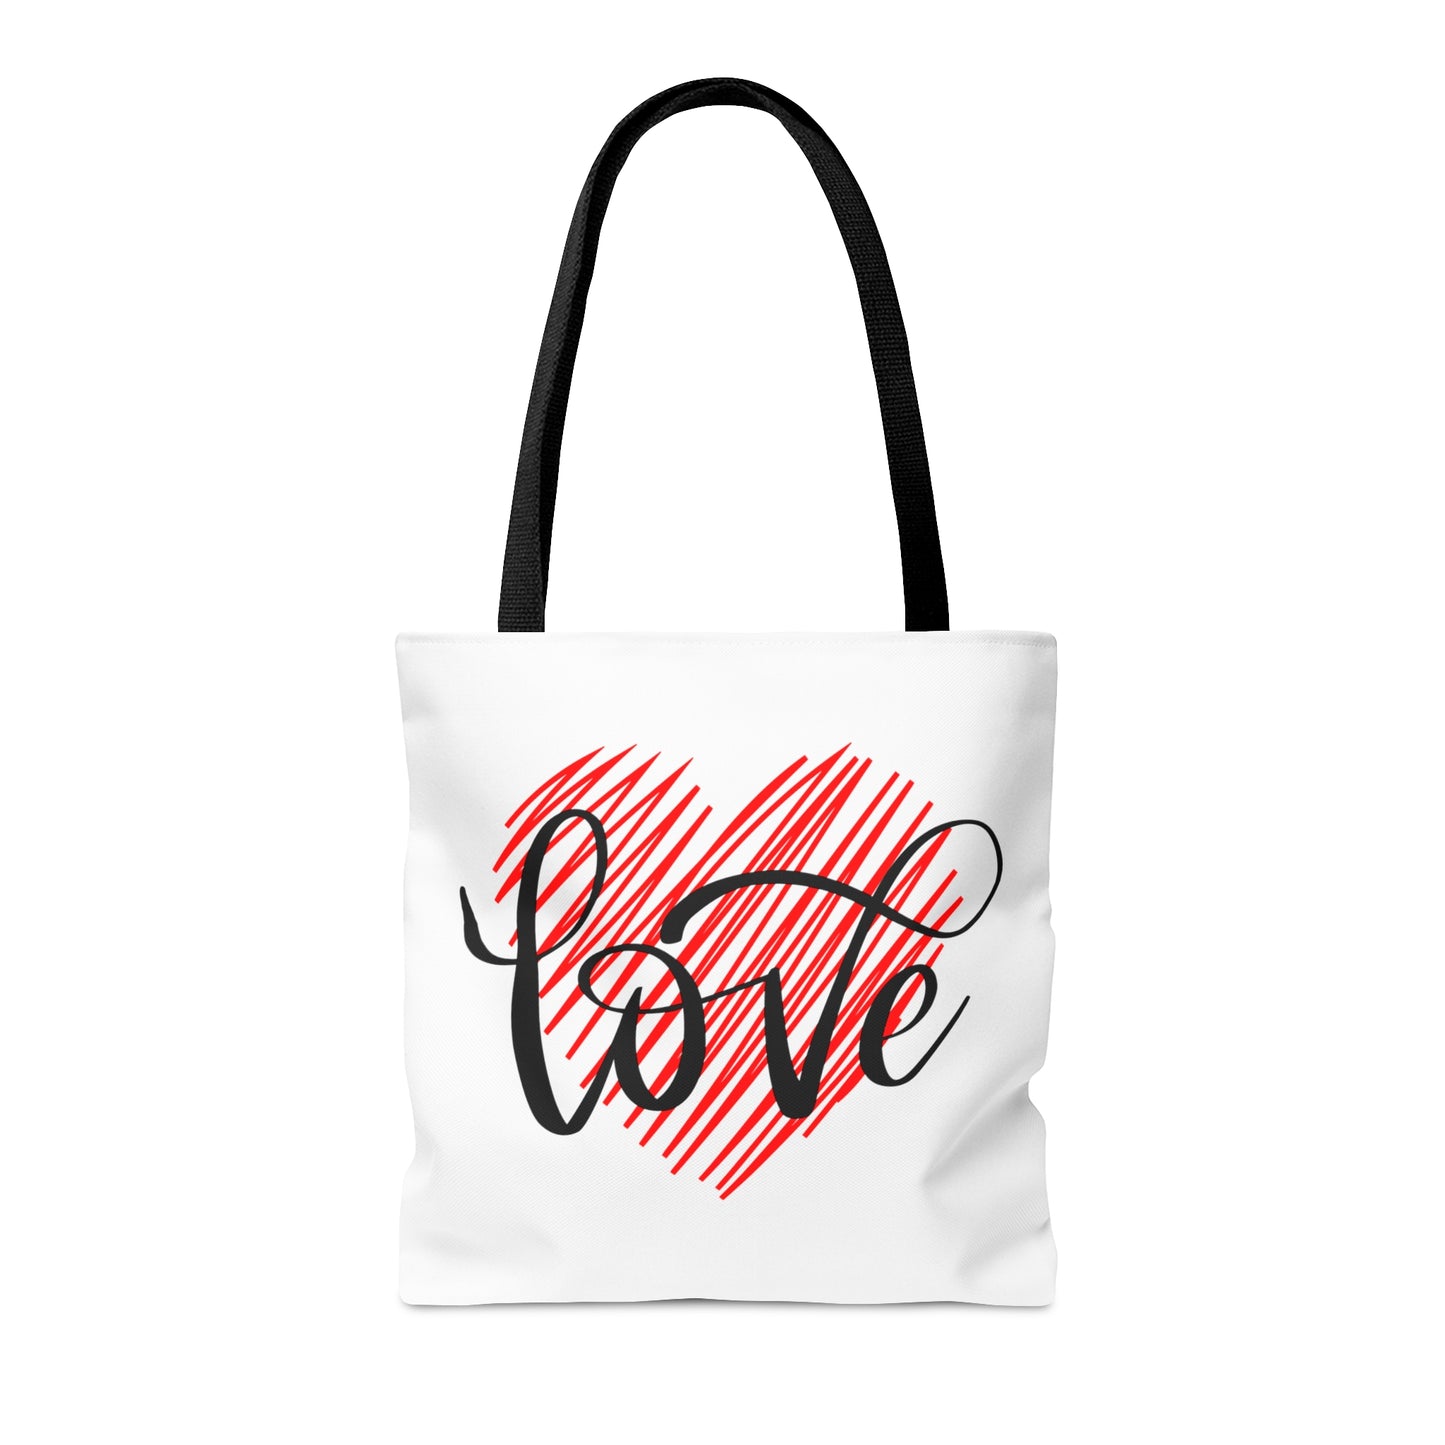 Beautiful Heart with Love Printed Tote Bag, Valentine's Tote Bag